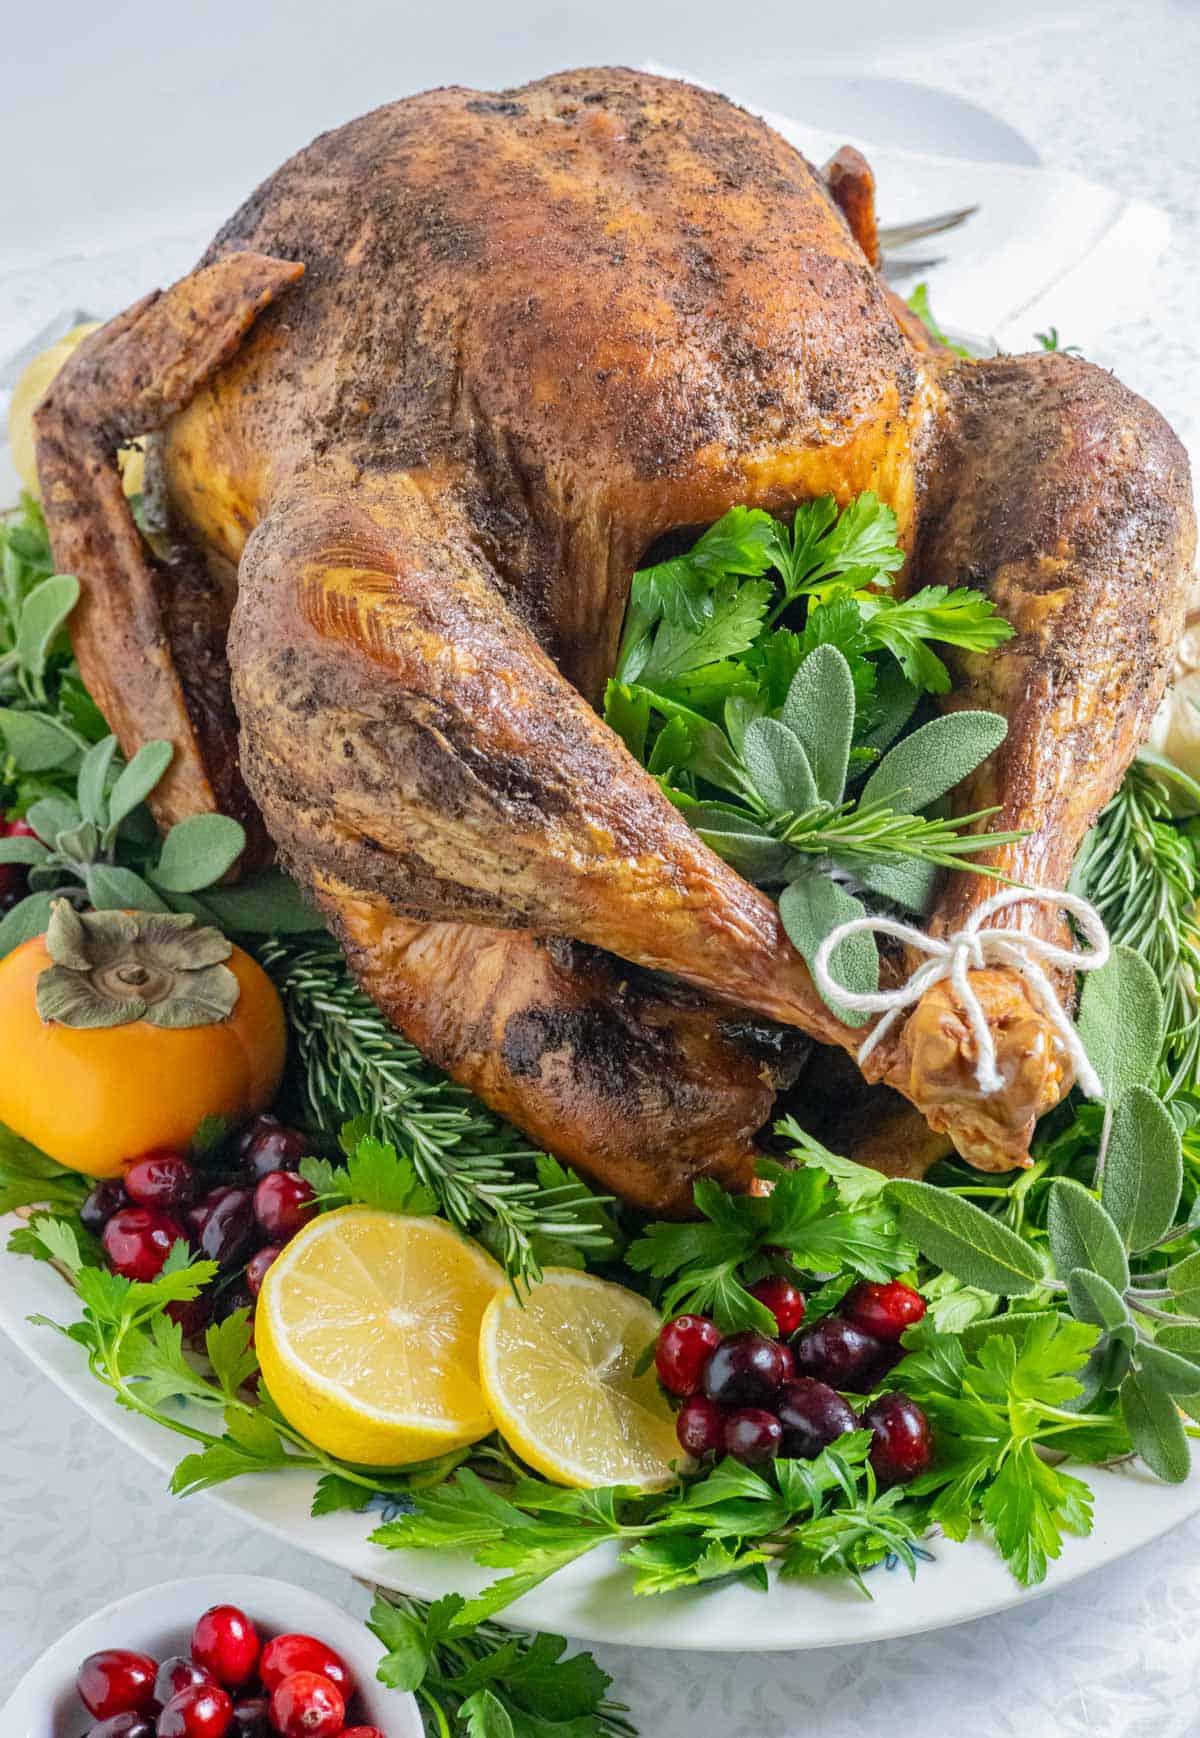 Crisp, golden whole turkey on a platter with herbs in the cavity and platter.